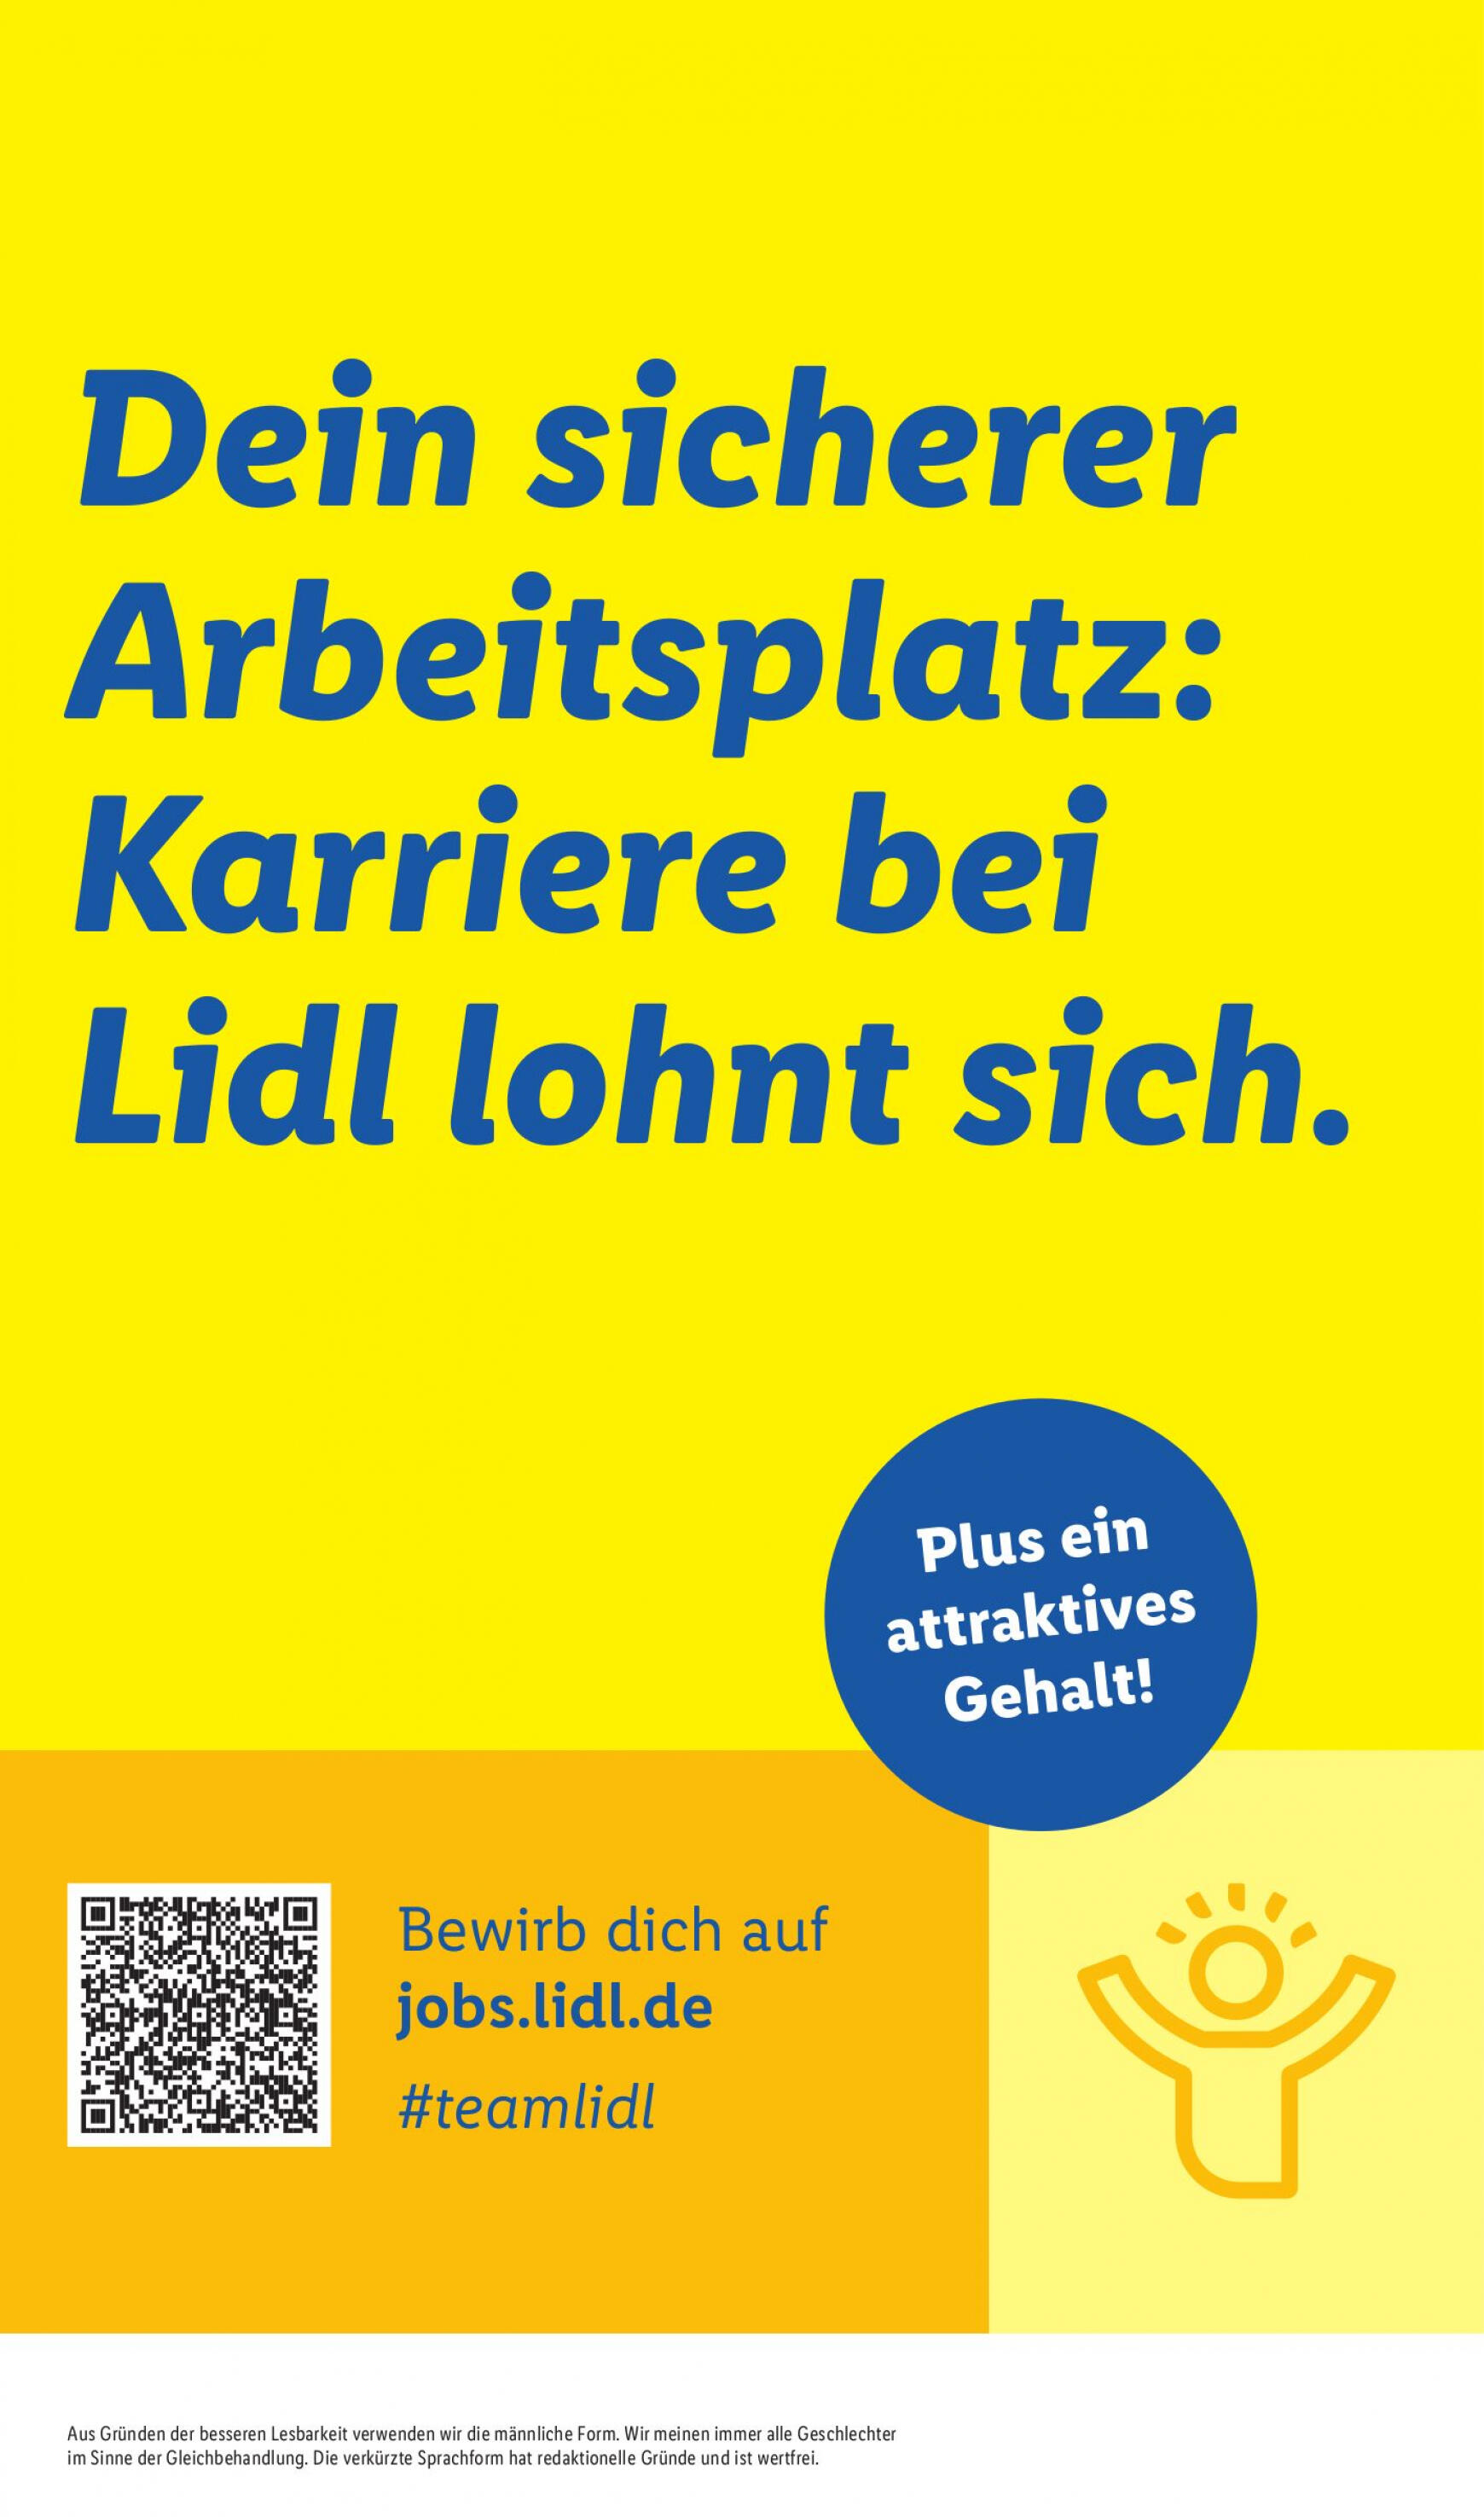 lidl - Flyer Lidl aktuell 29.04. - 04.05. - page: 55